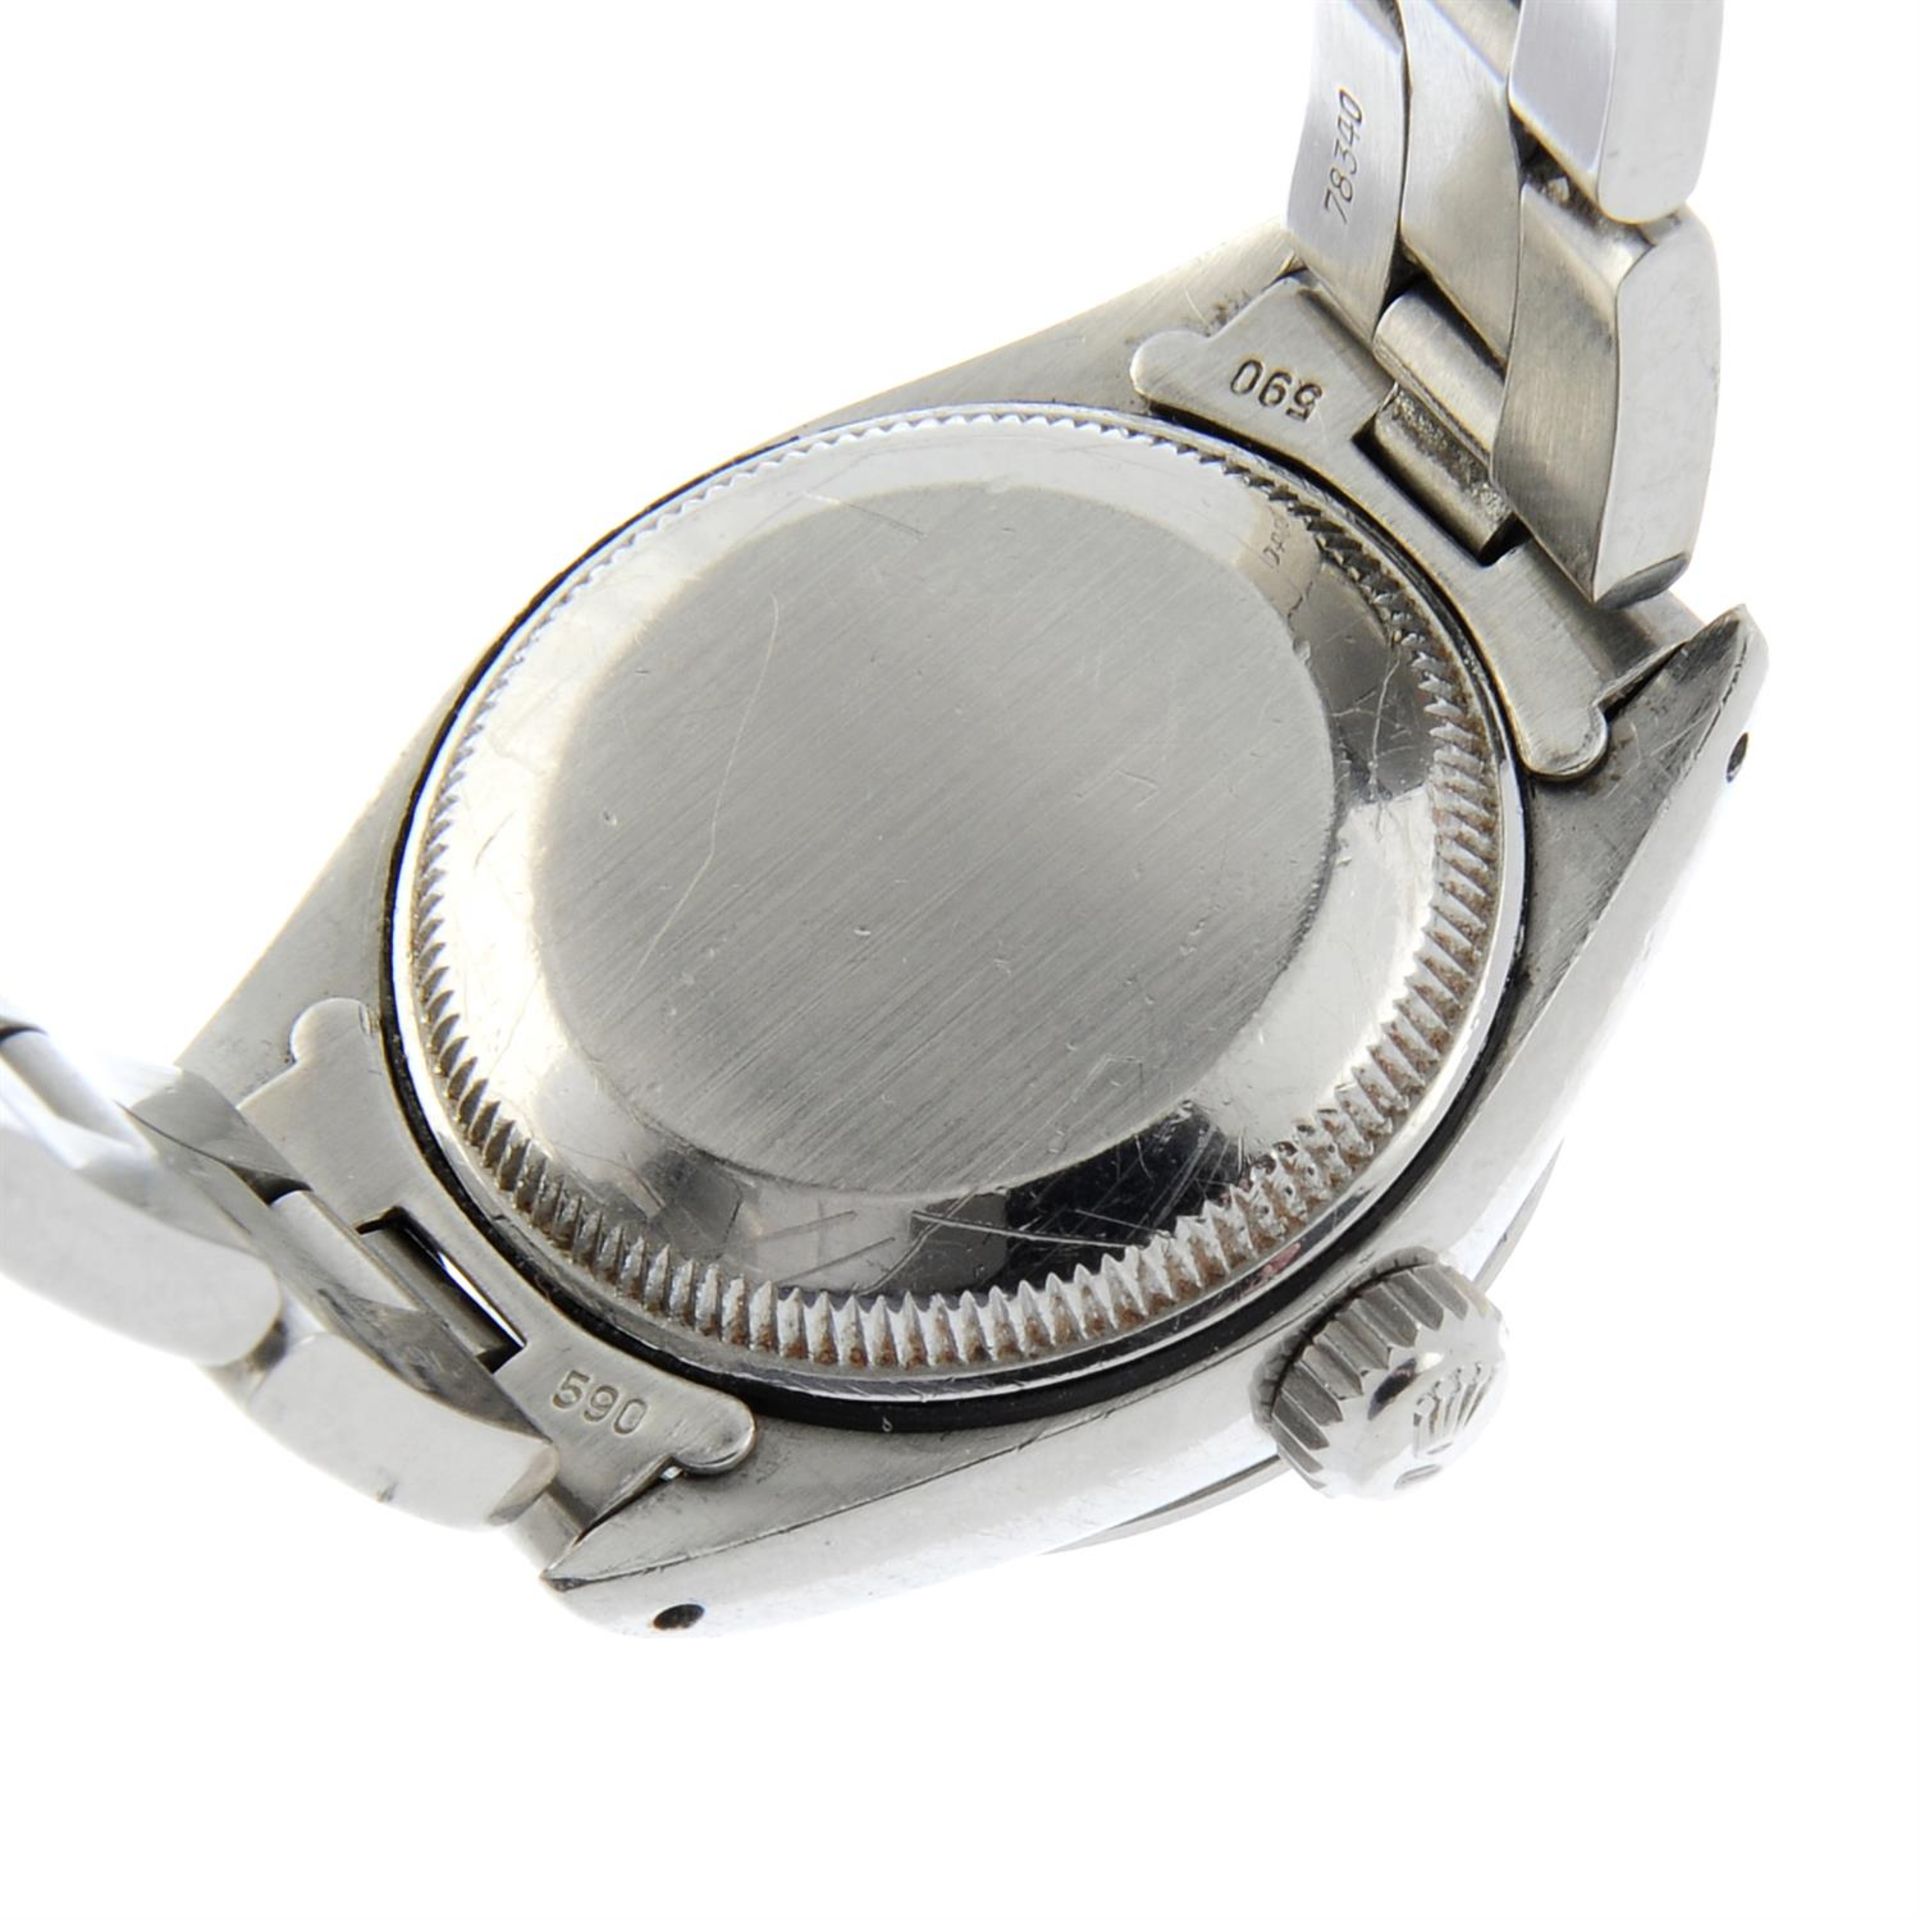 ROLEX - a stainless steel Oyster Perpetual Date bracelet watch, 26mm. - Image 4 of 4